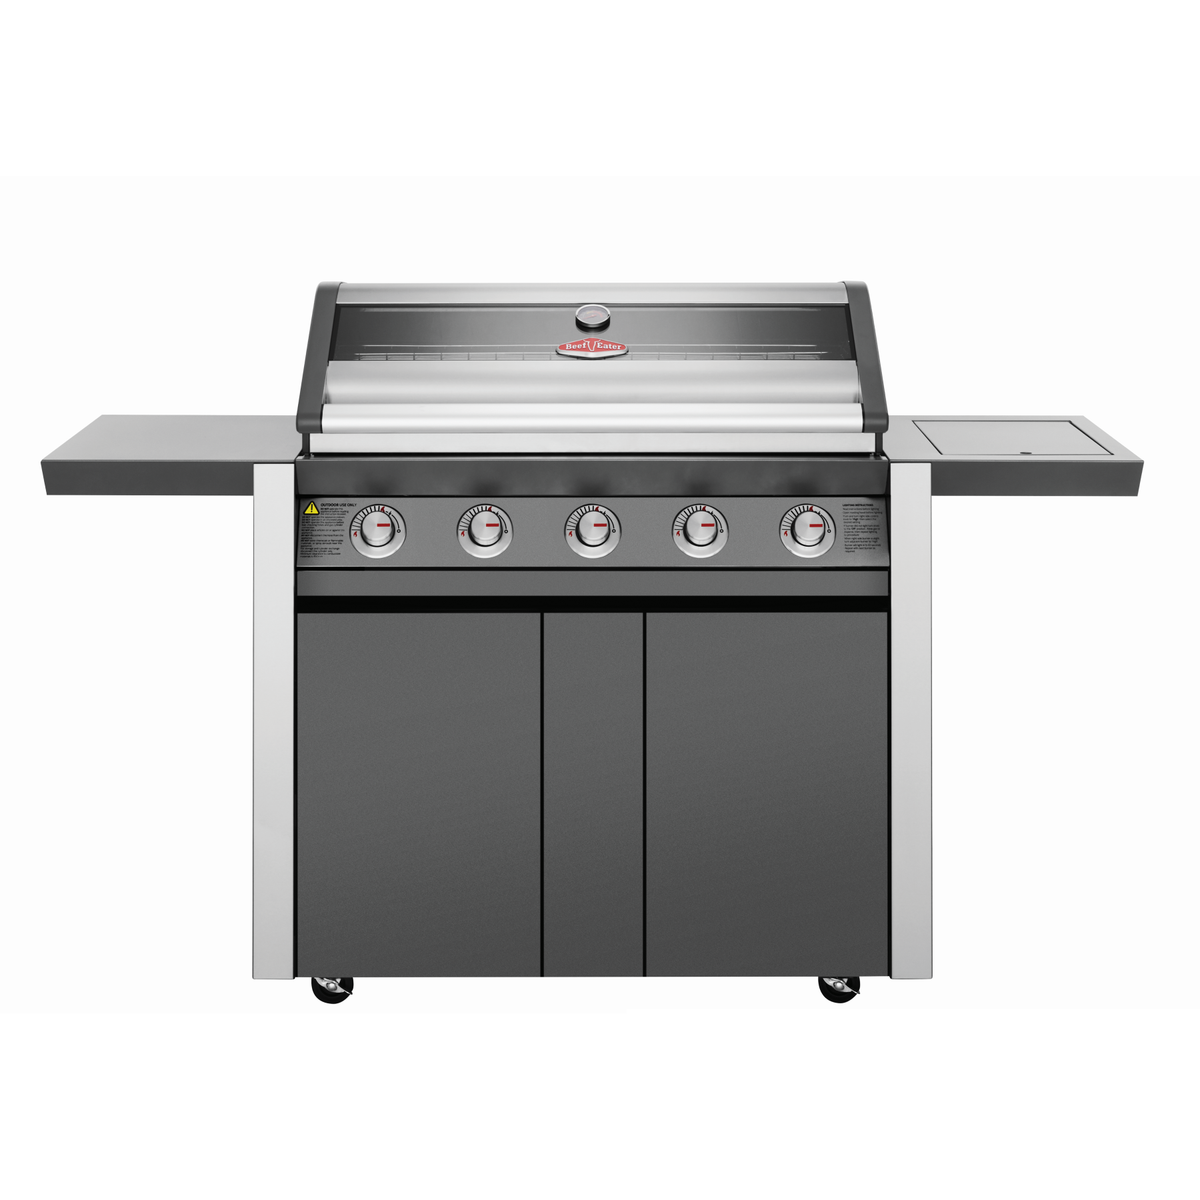 BeefEater 1600E Series 5 Burner Barbecue with Cabinet Trolley and Side Burner